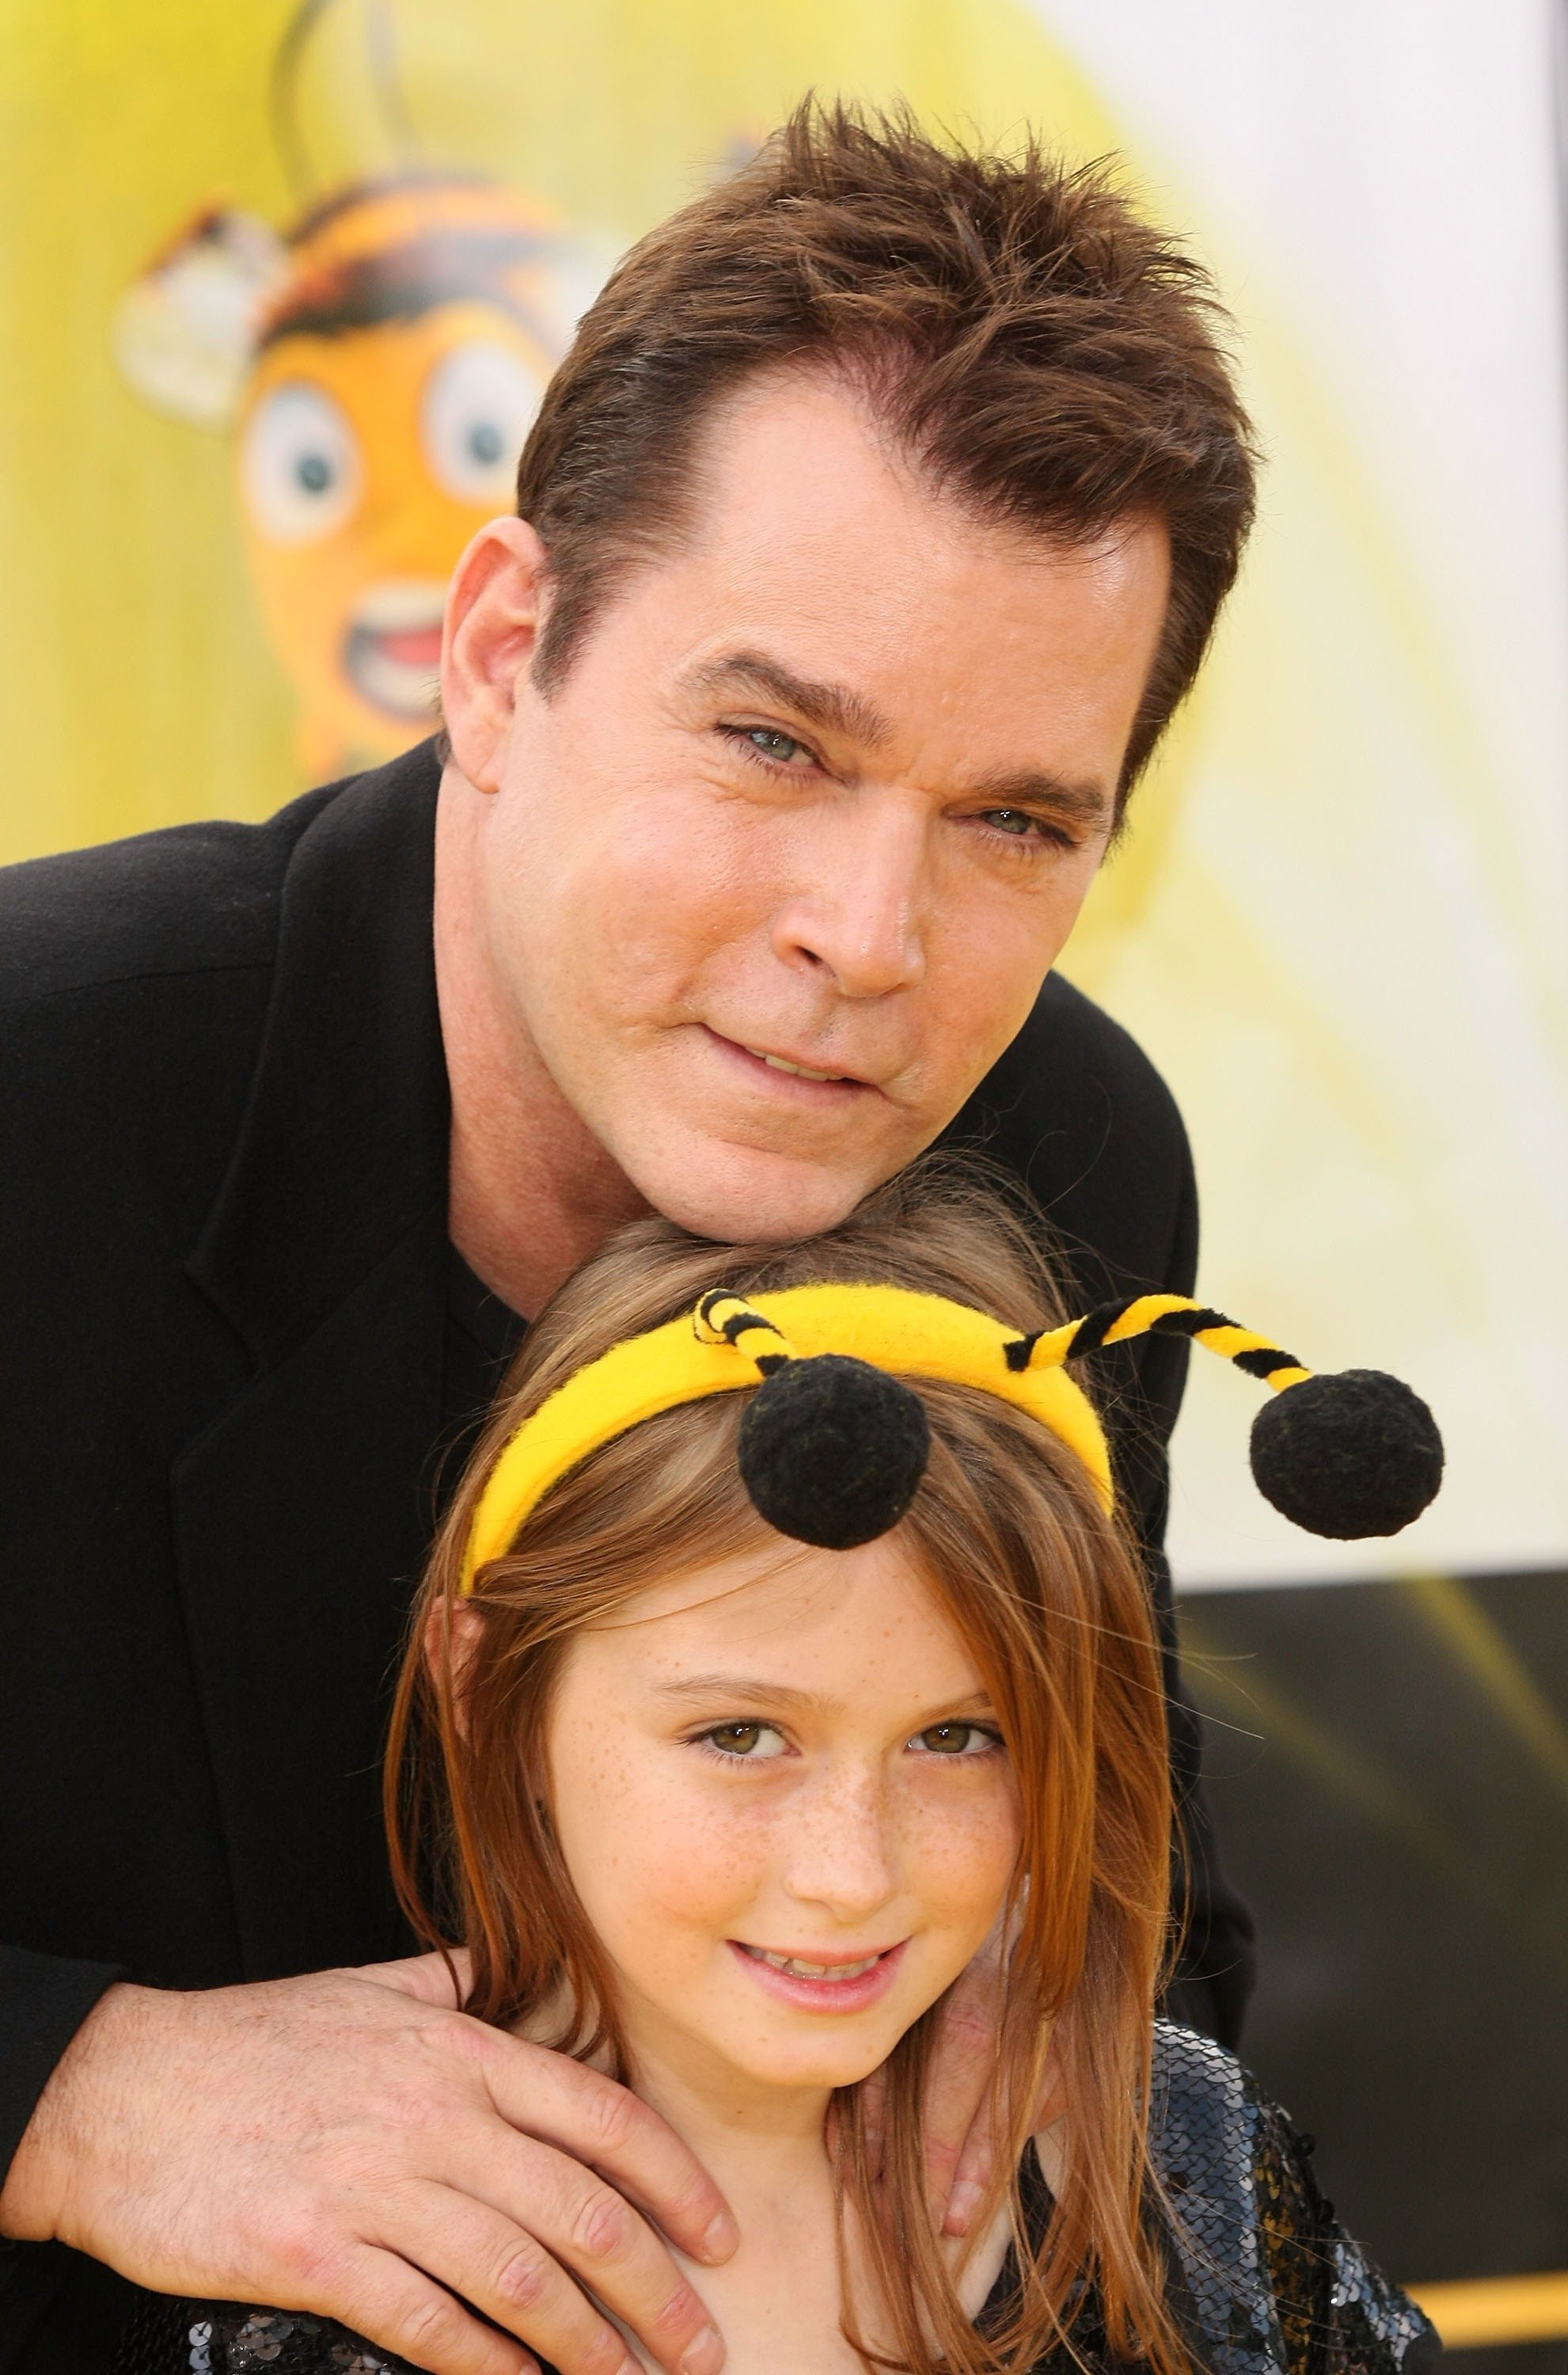 Actor Ray Liotta and his daughter Karsen at the premiere of DreamWorks Animation's "Bee Movie" at the Mann's Bruin Theatre on October 28, 2007 in Los Angeles, California. | Source: Getty Images